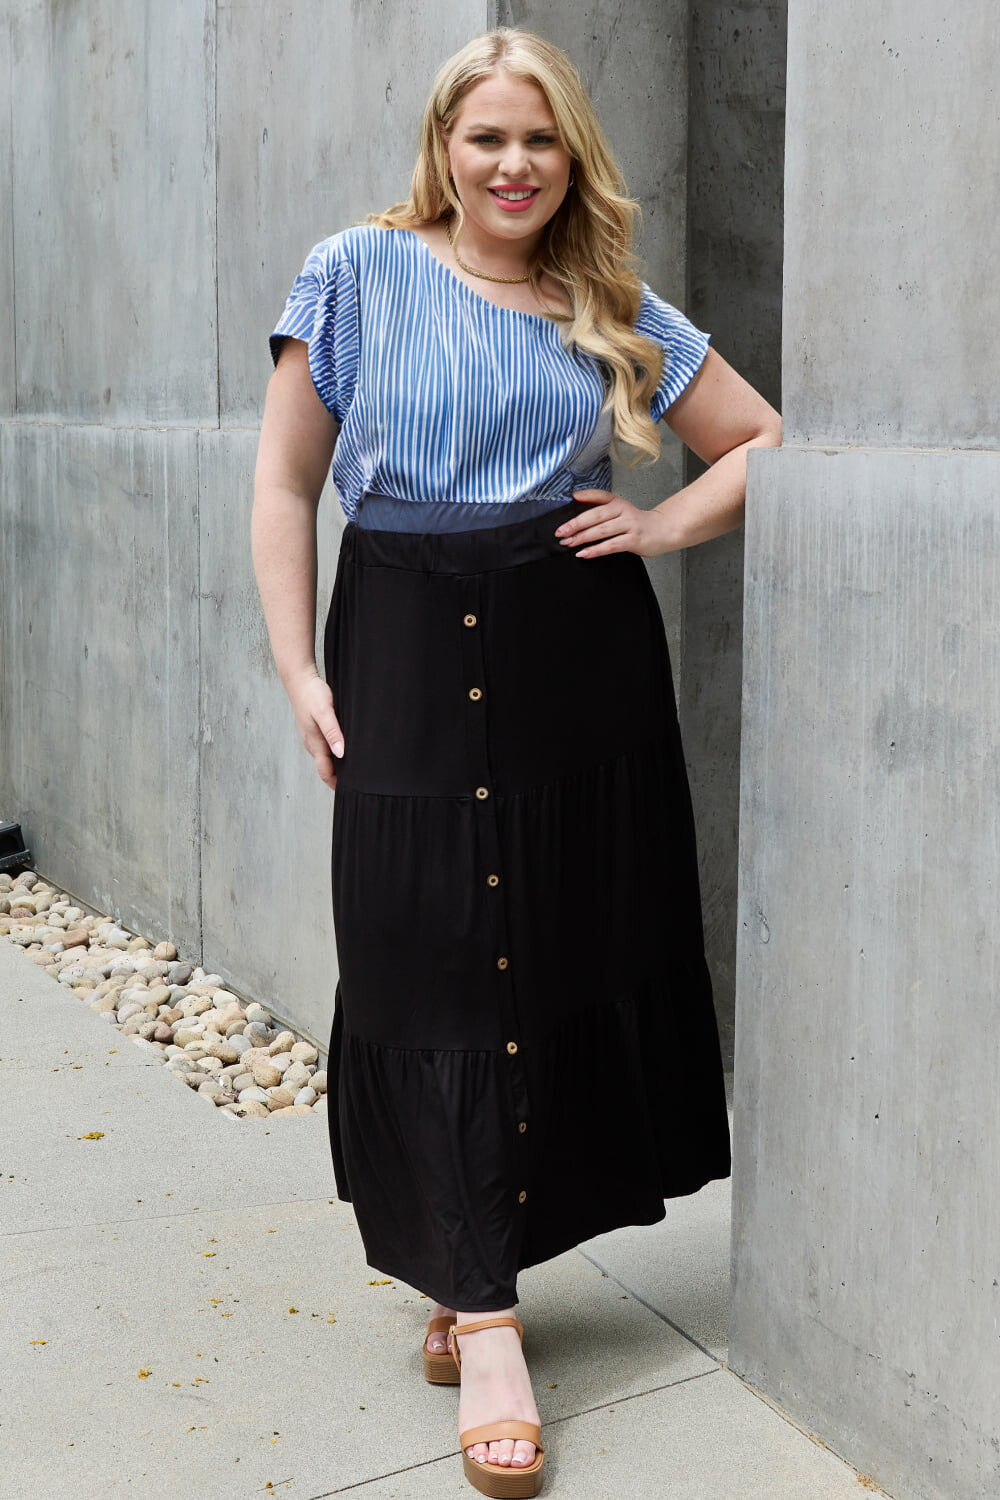 Missionary modest maxi skirt from Nauvoo Supply Co